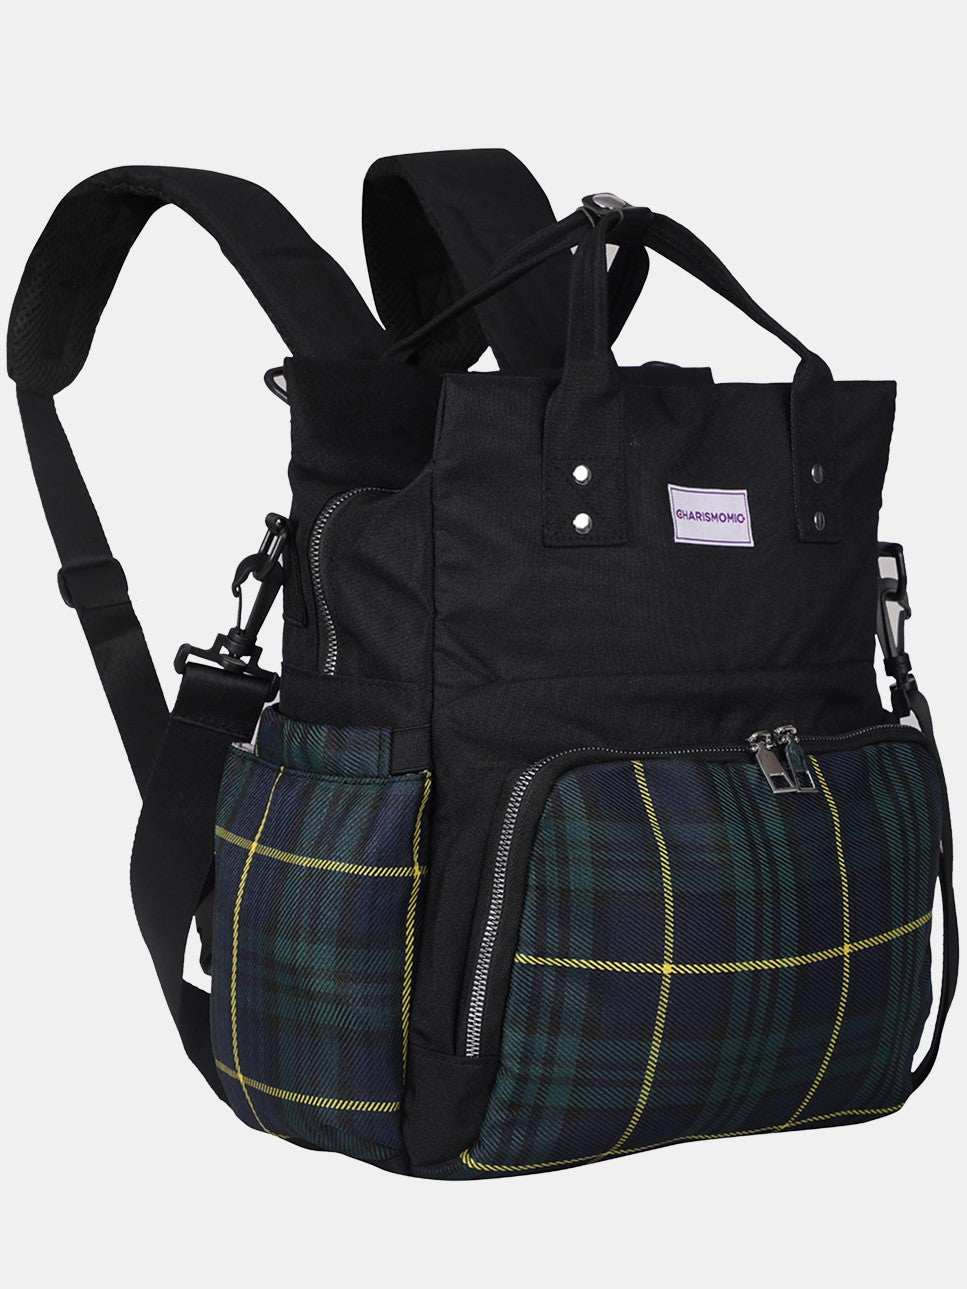 Plaid With My Love Diaper Bag